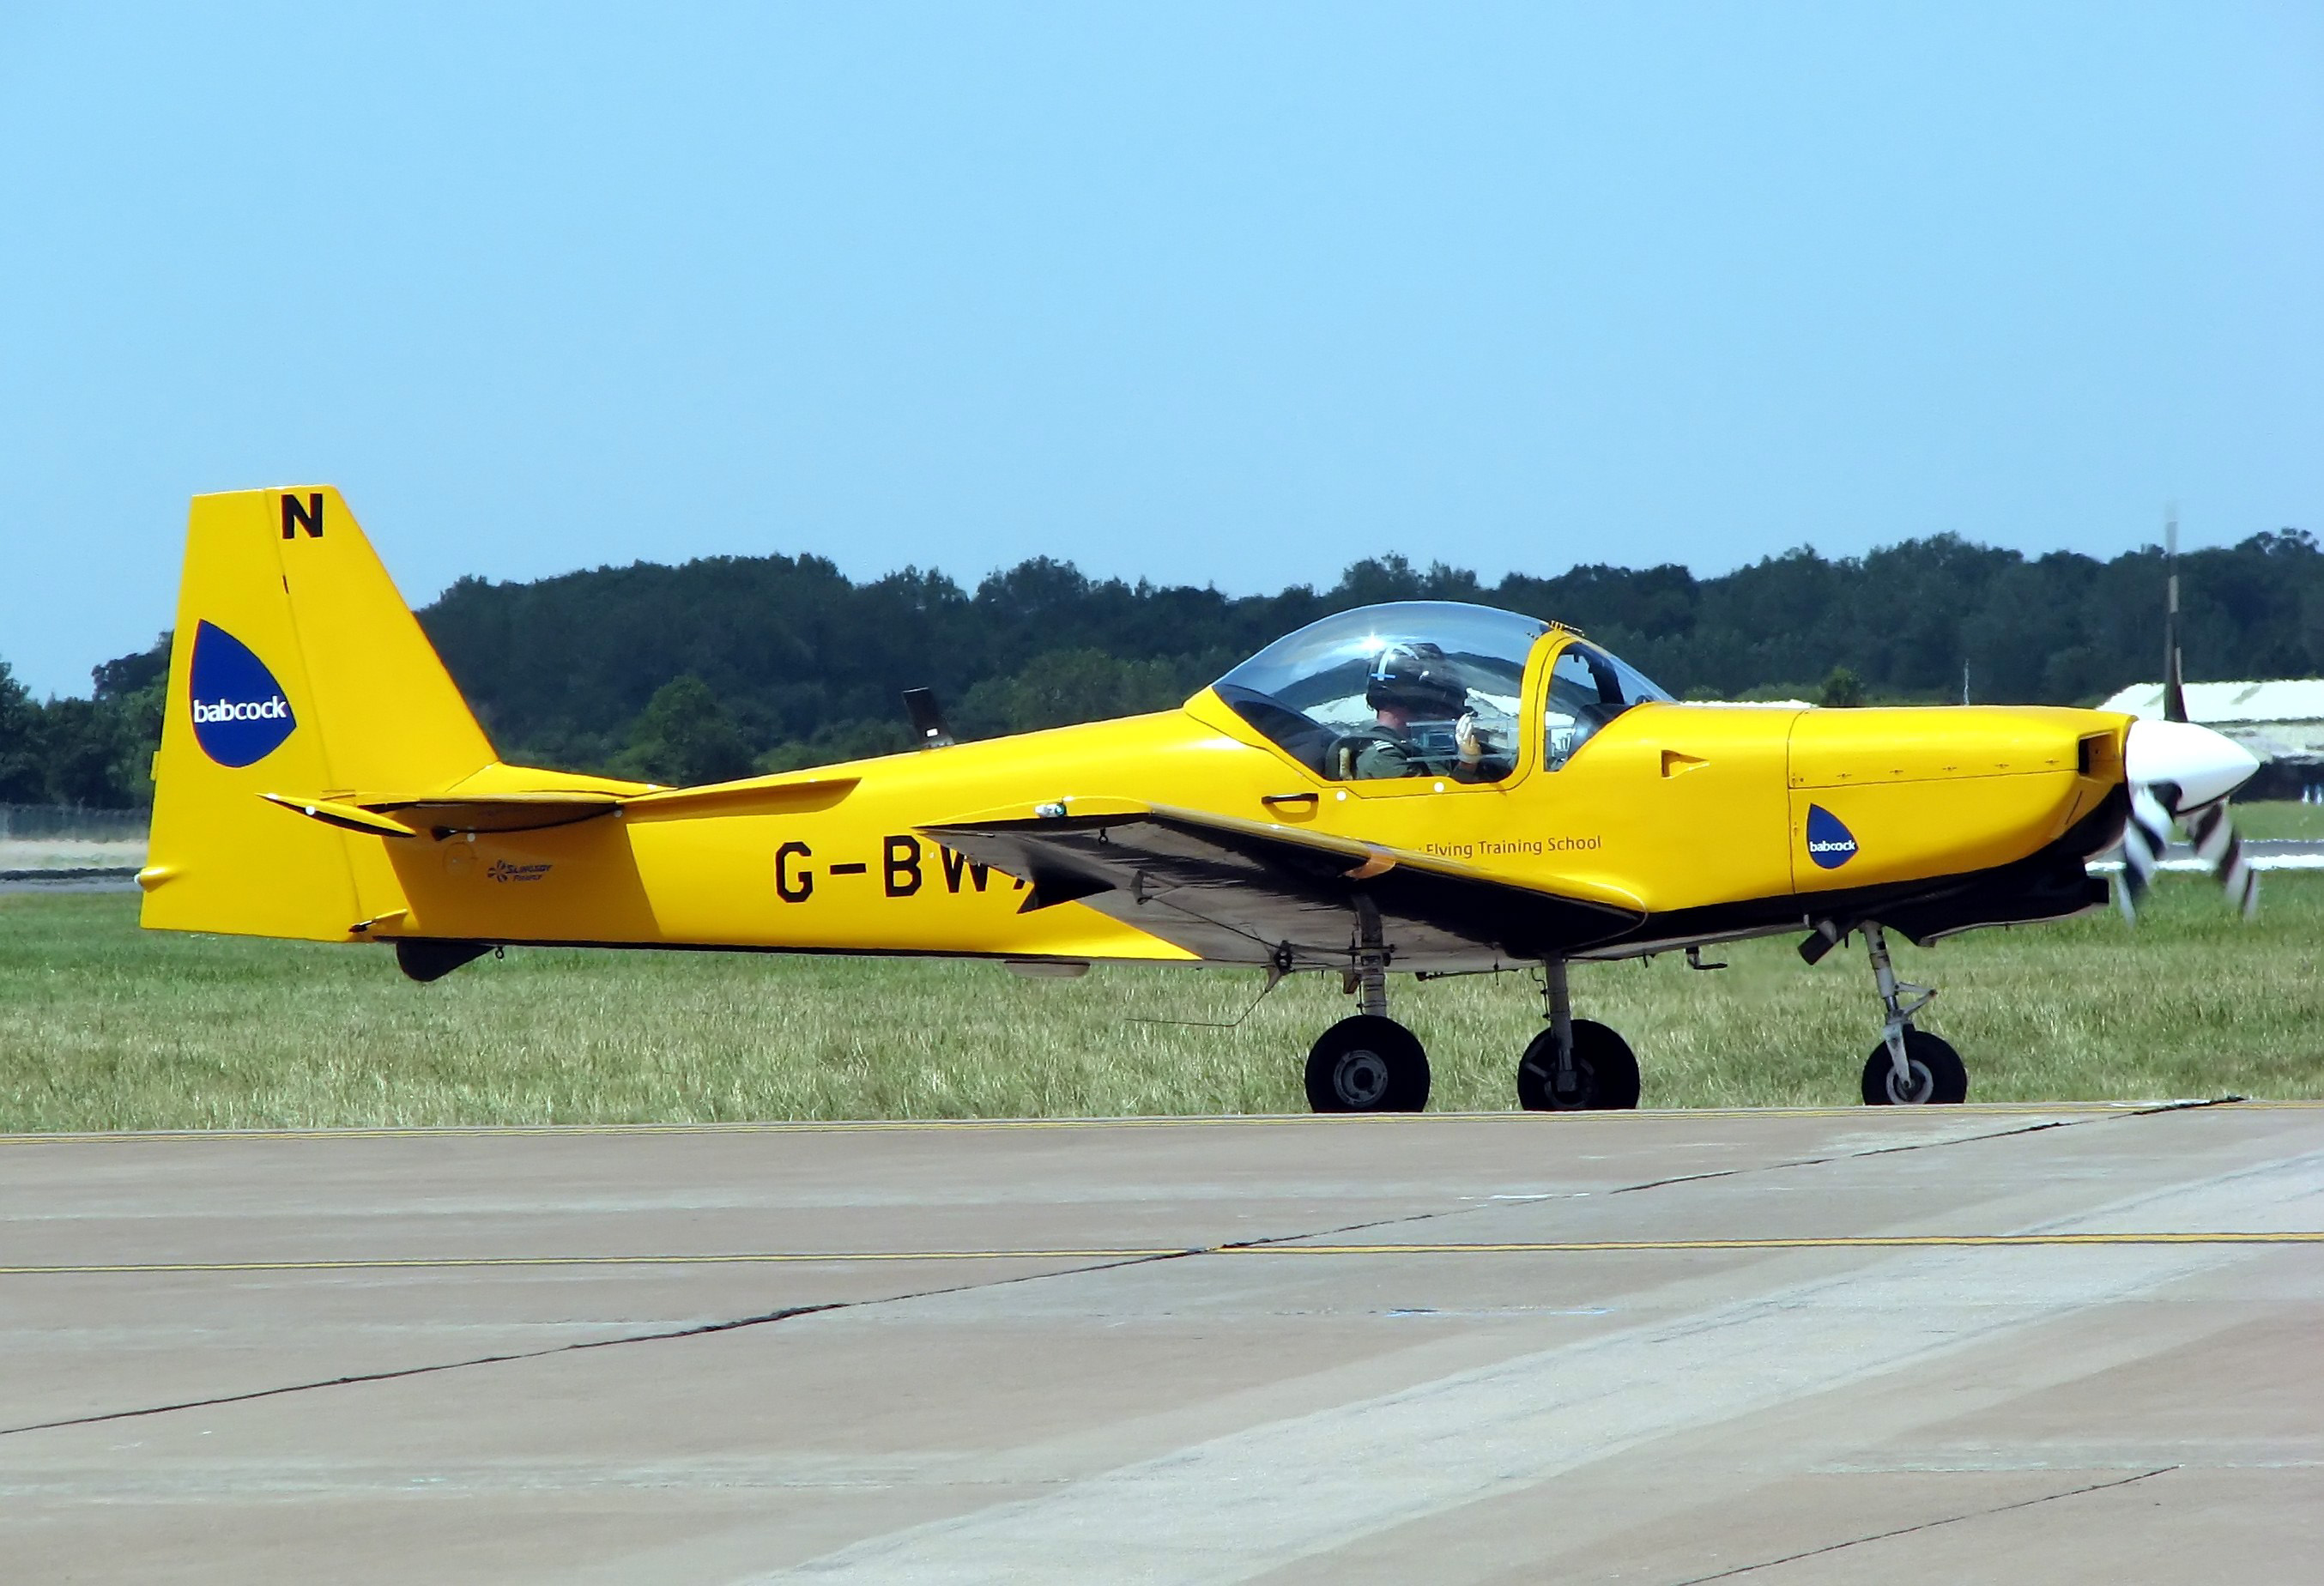 Slingsby T-67 Firefly previous